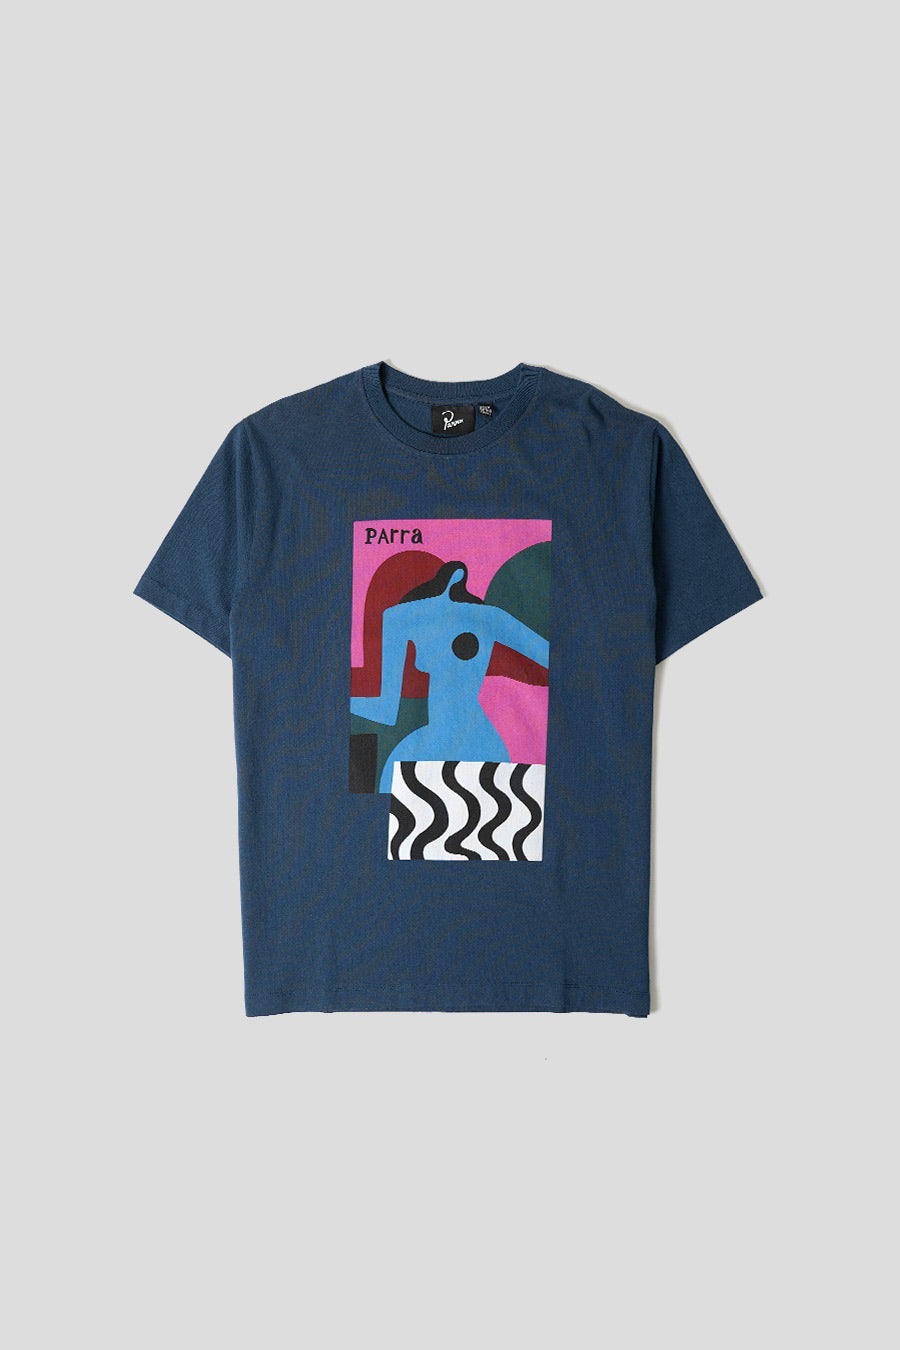 BY PARRA - NAVY BLUE DISTORTION TABLE T-SHIRT - LE LABO STORE